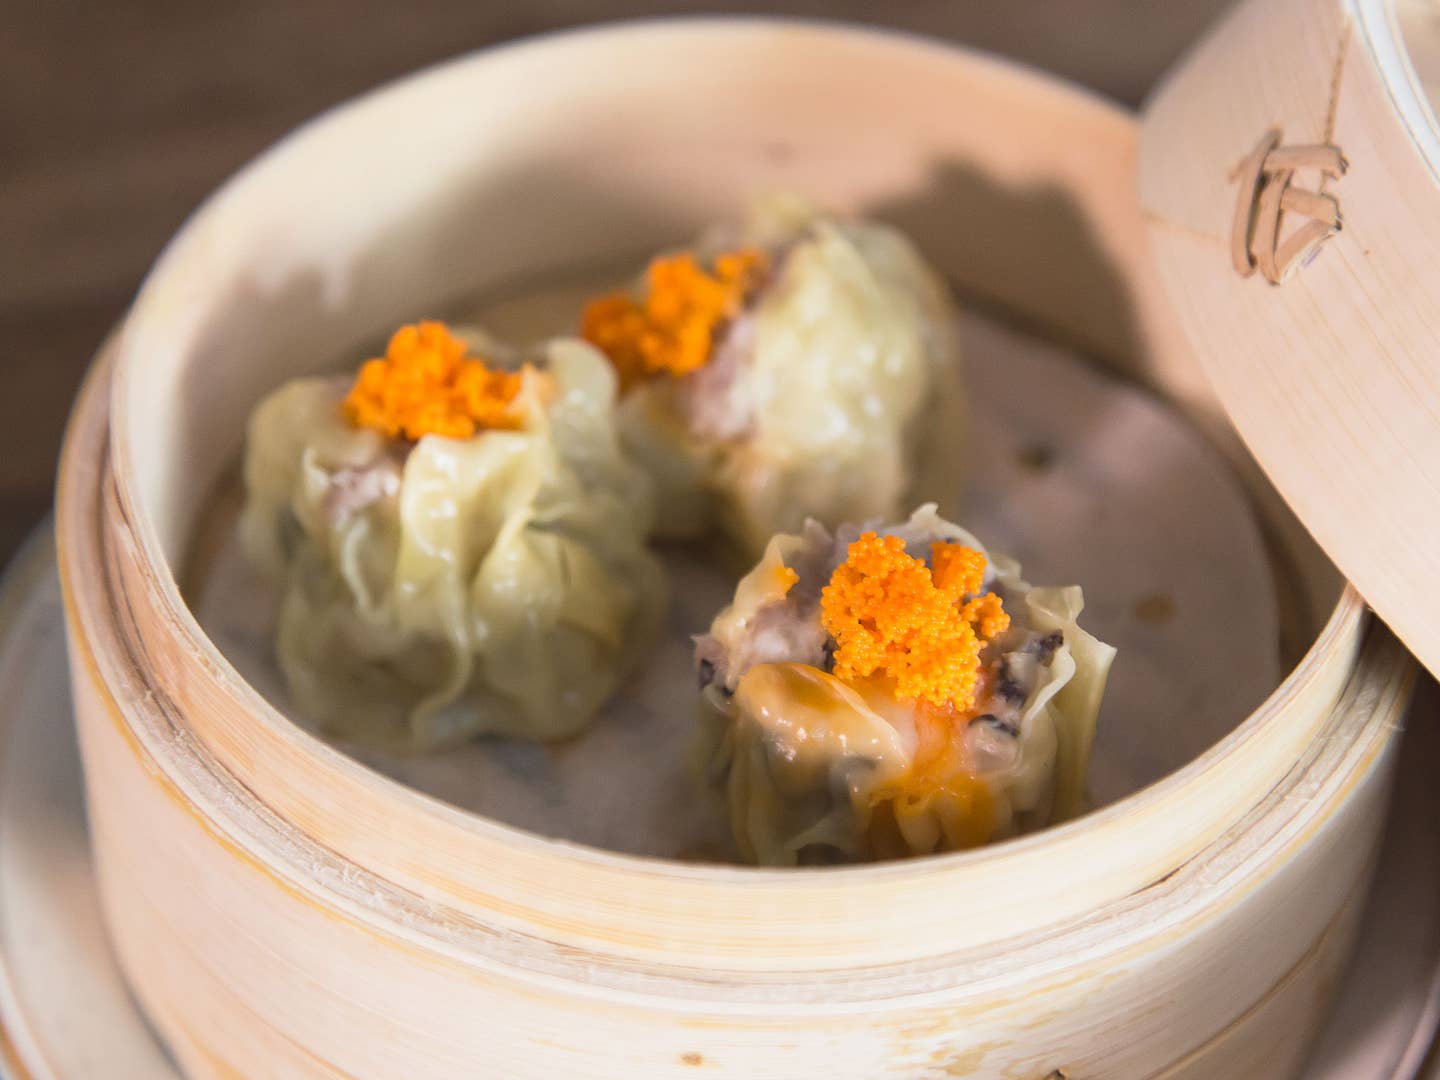 Homemade Dumplings So Easy You Don’t Even Have to Fold Them